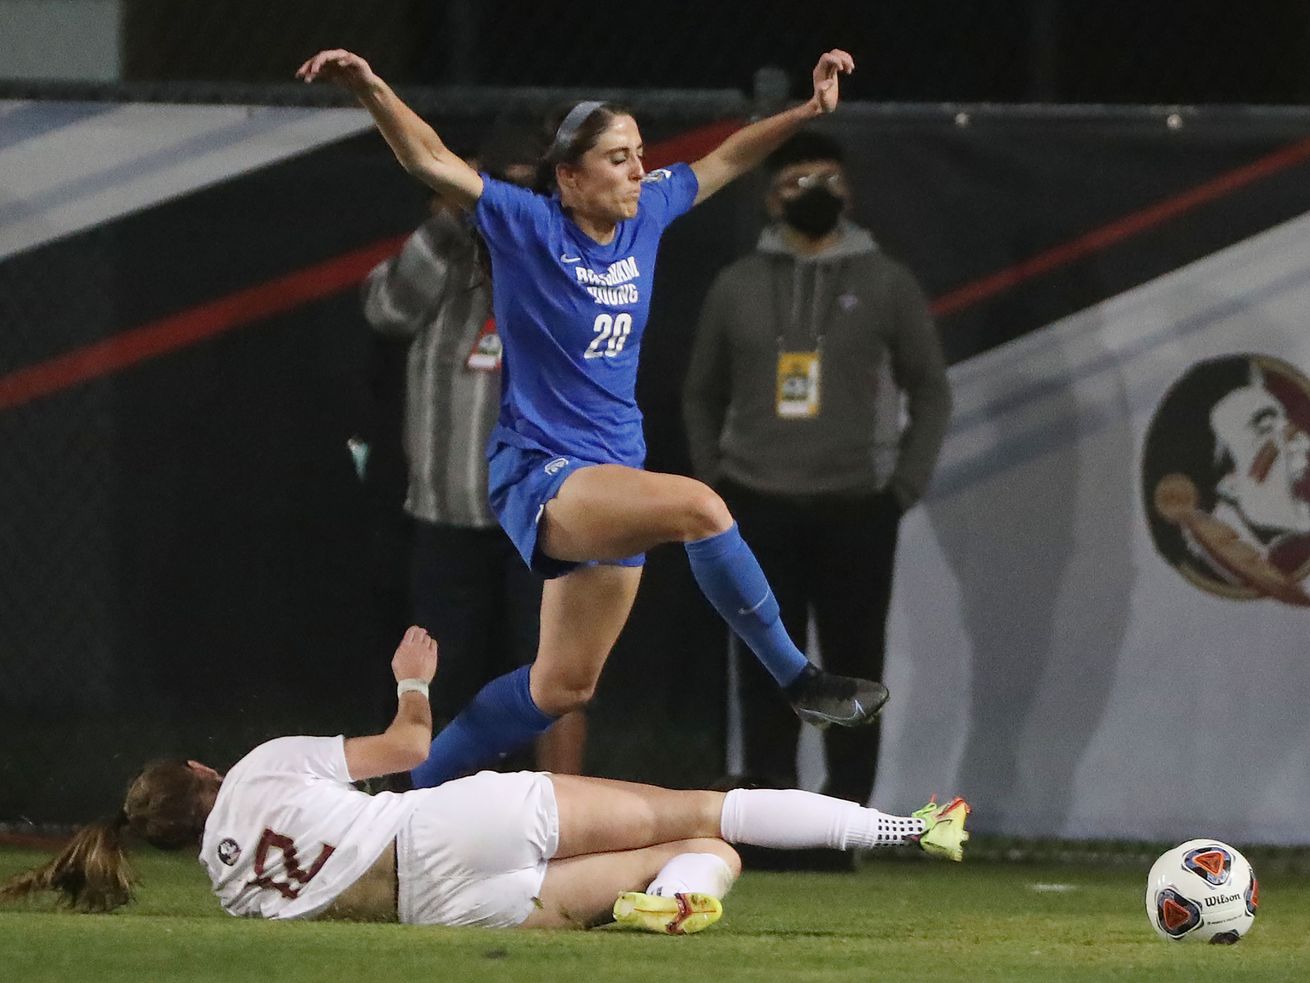 BYU forward Cameron Tucker and Florida State Seminoles Heather Payne compete during the NCAA national soccer championship.